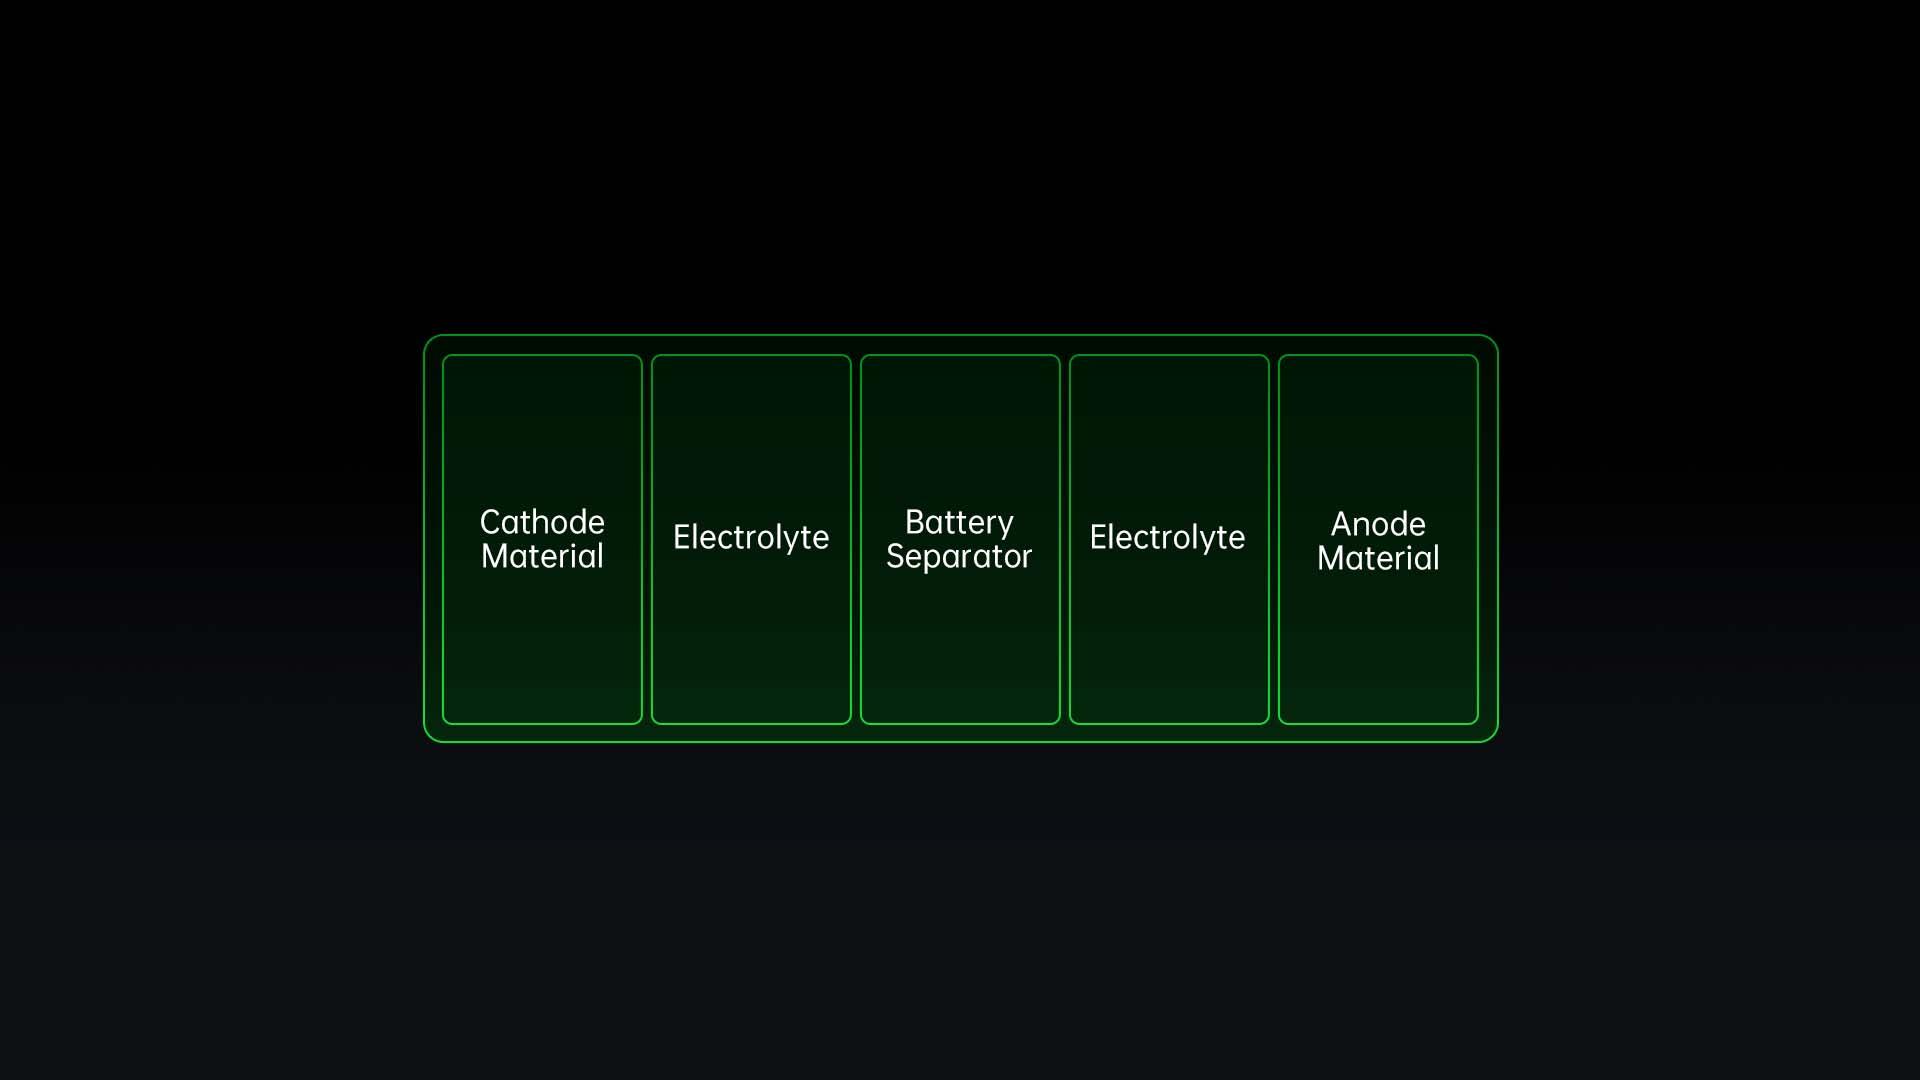 The structure of a lithium battery